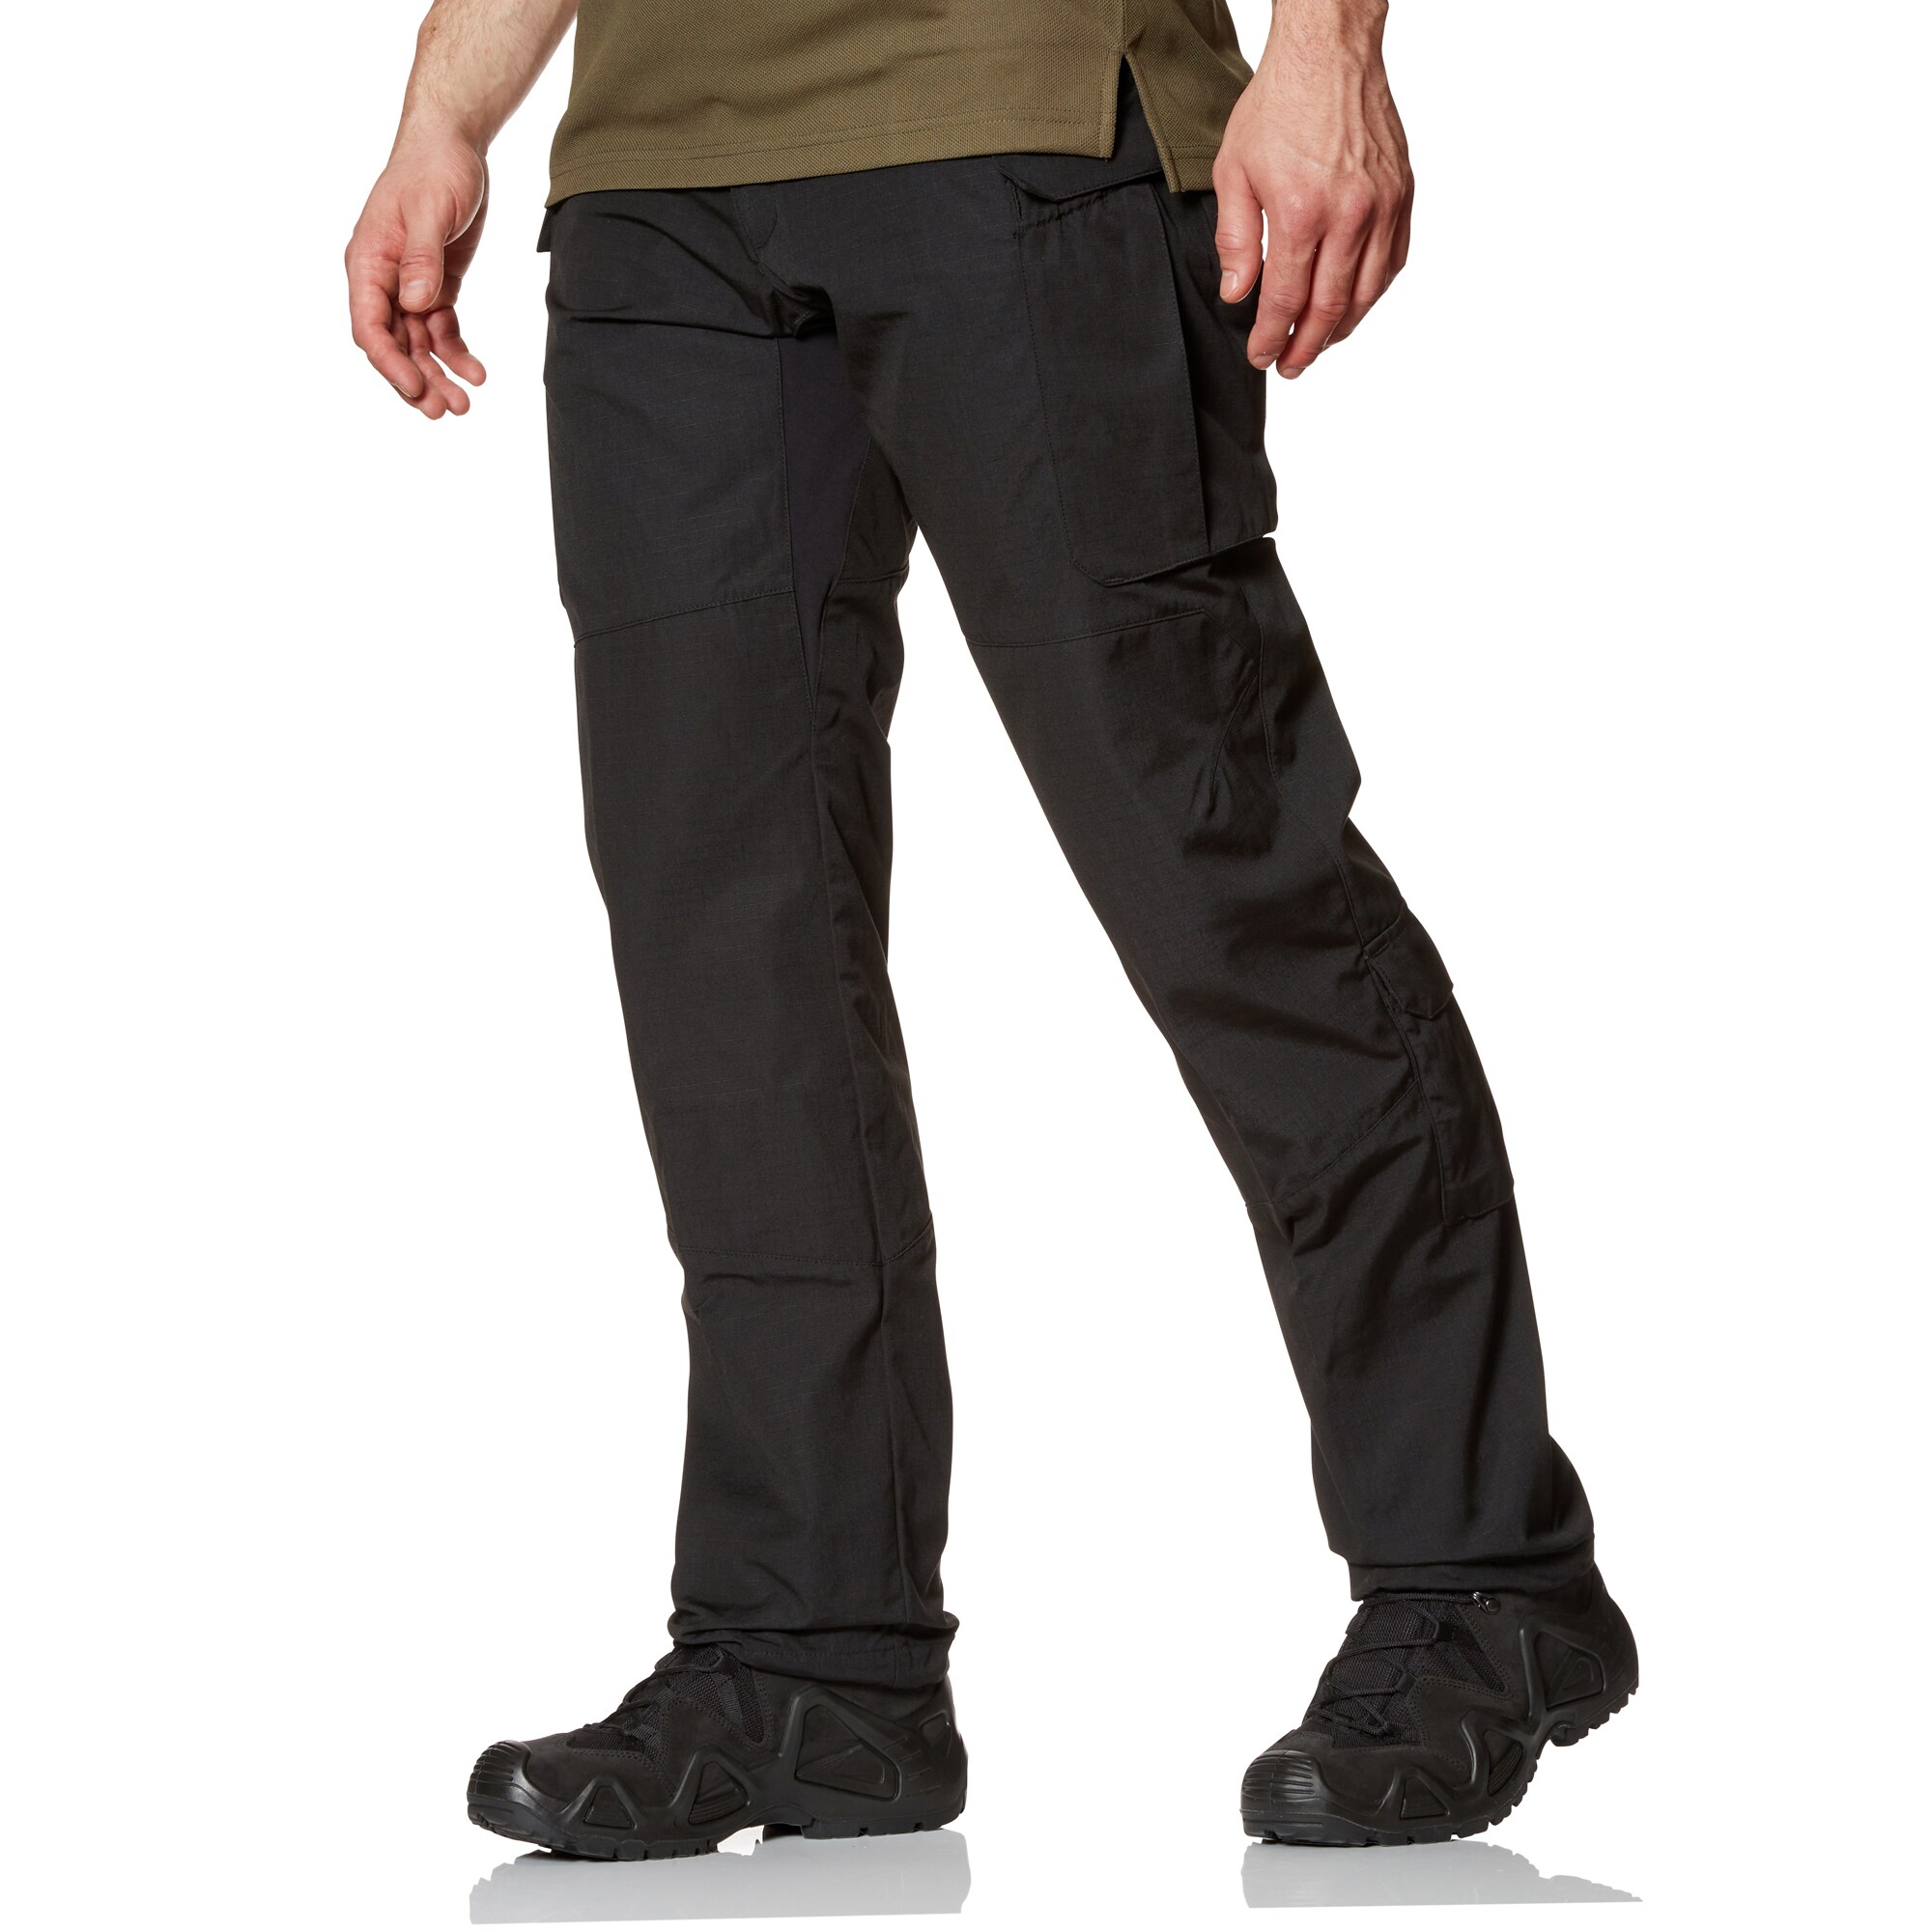 Purchase the Helikon-Tex MBDU Trousers black by ASMC